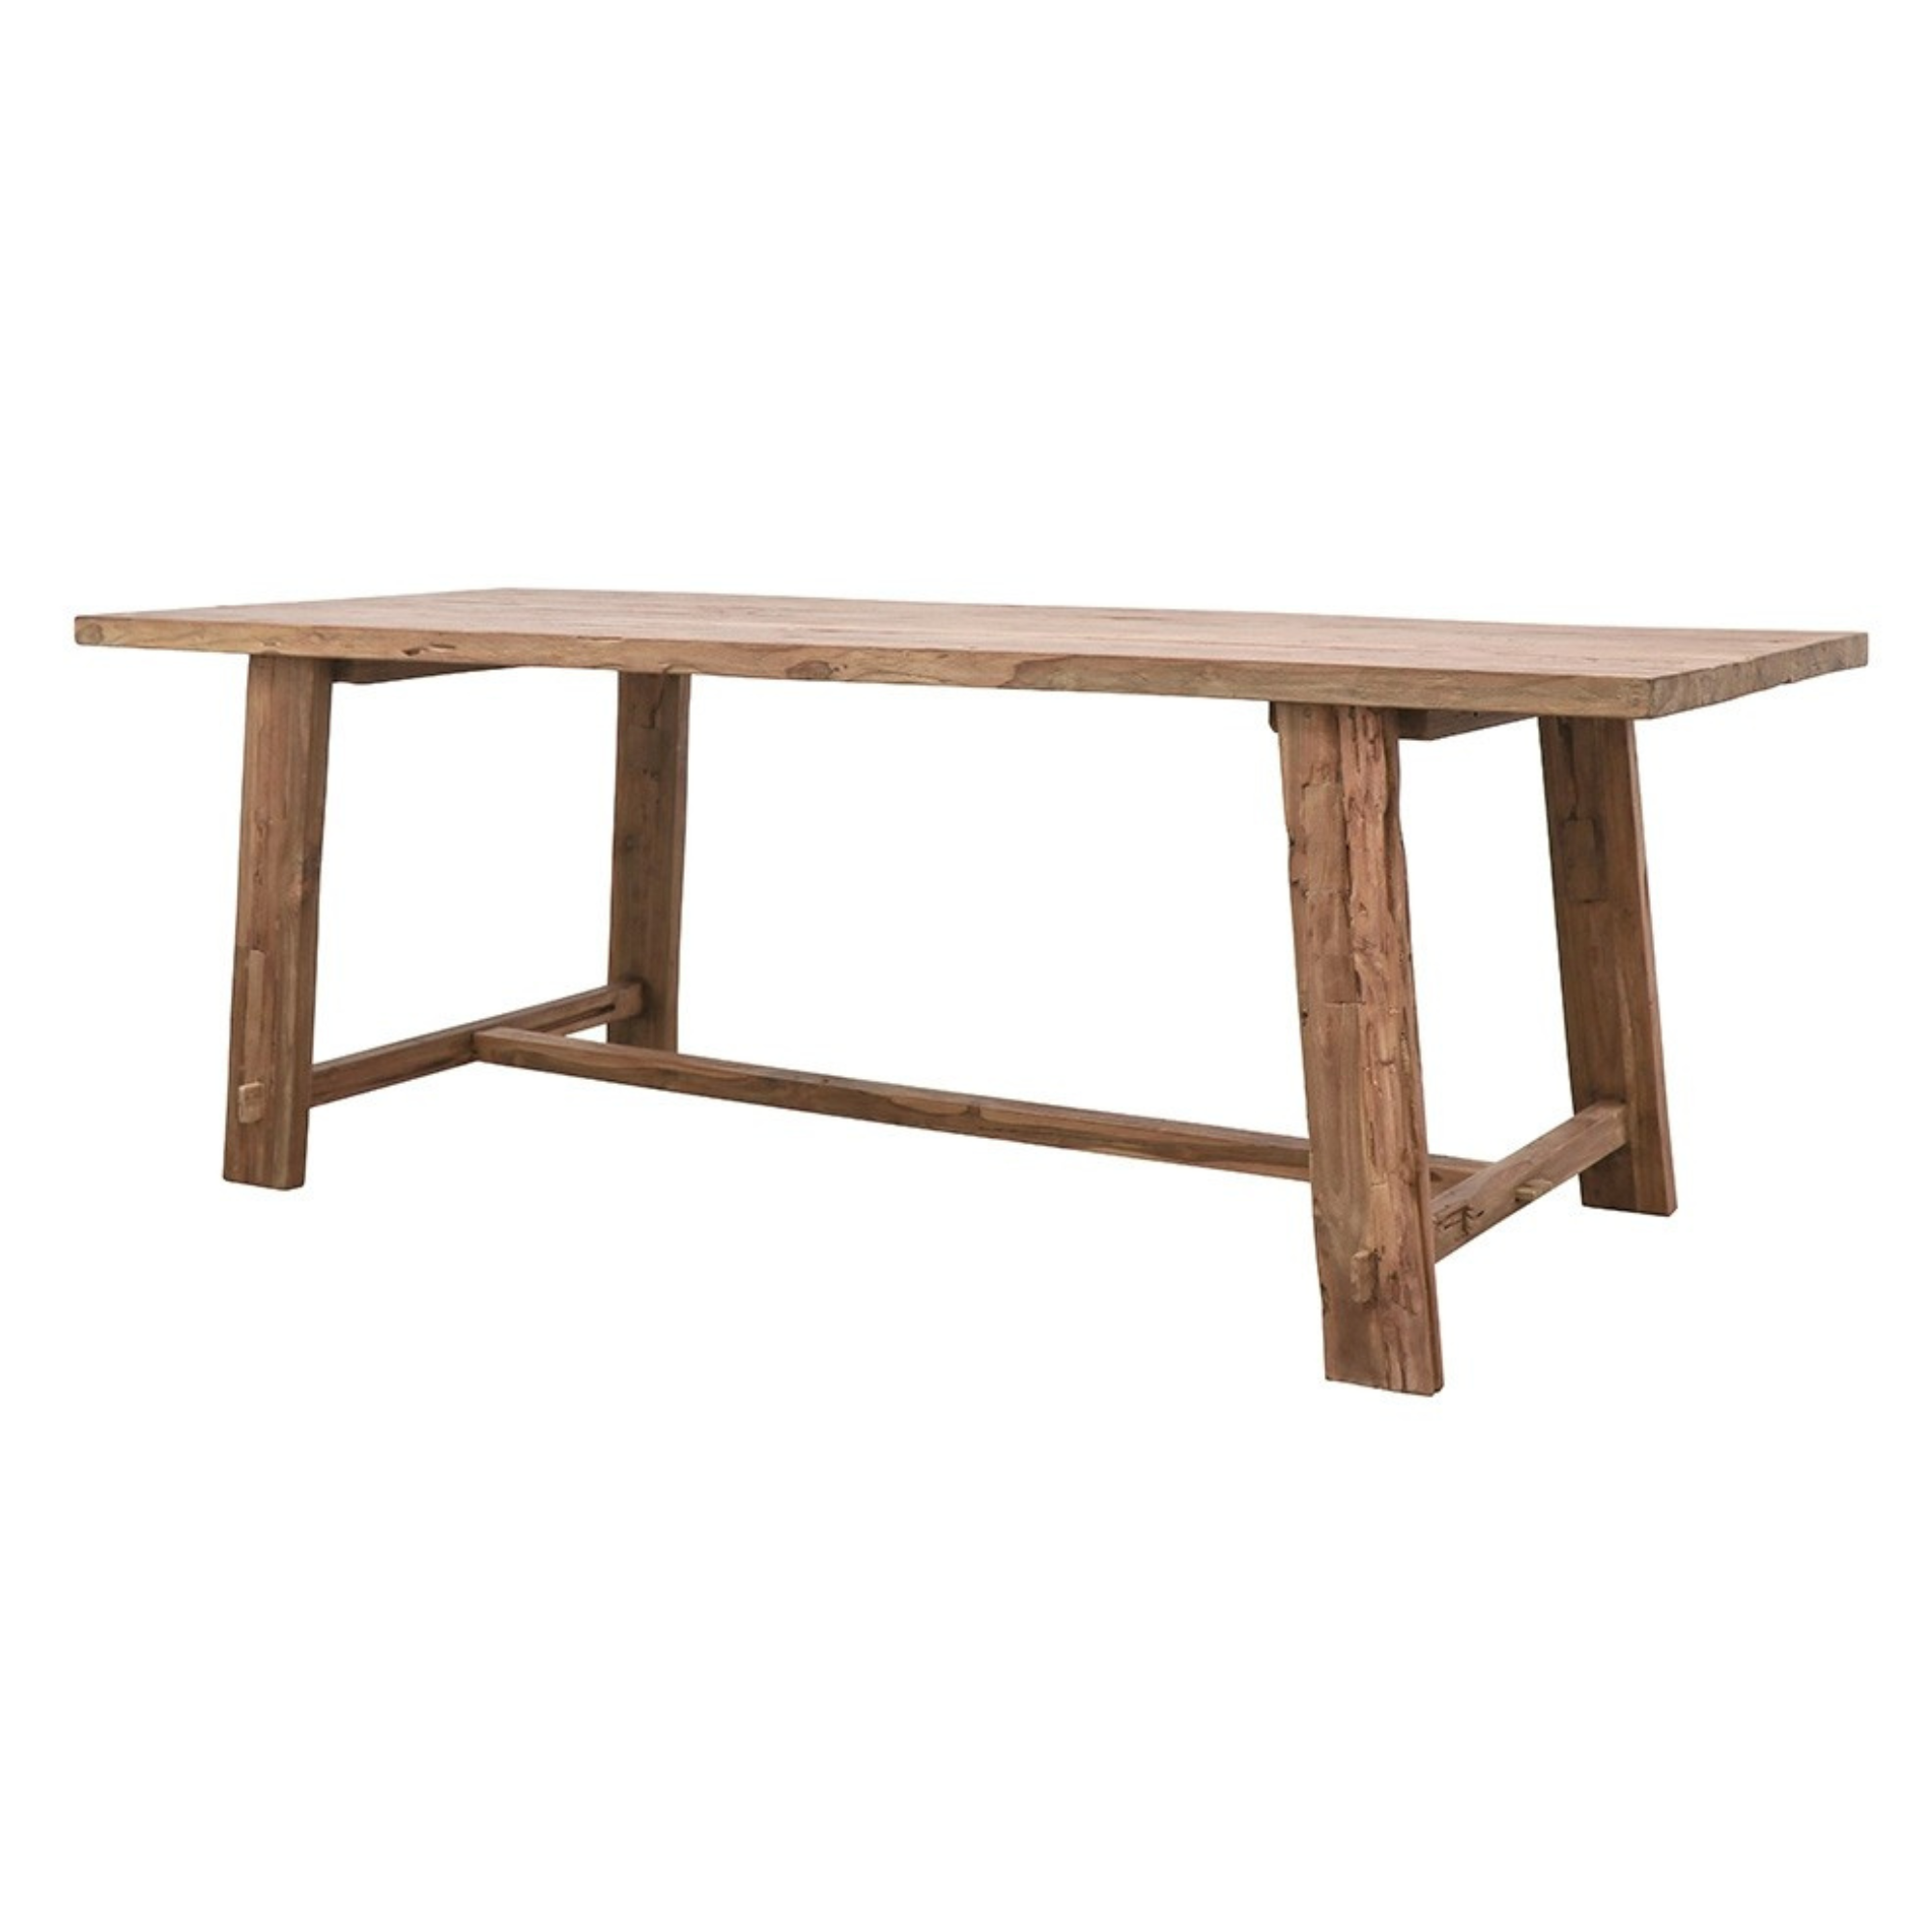 PORTO OUTDOOR DINING TABLE